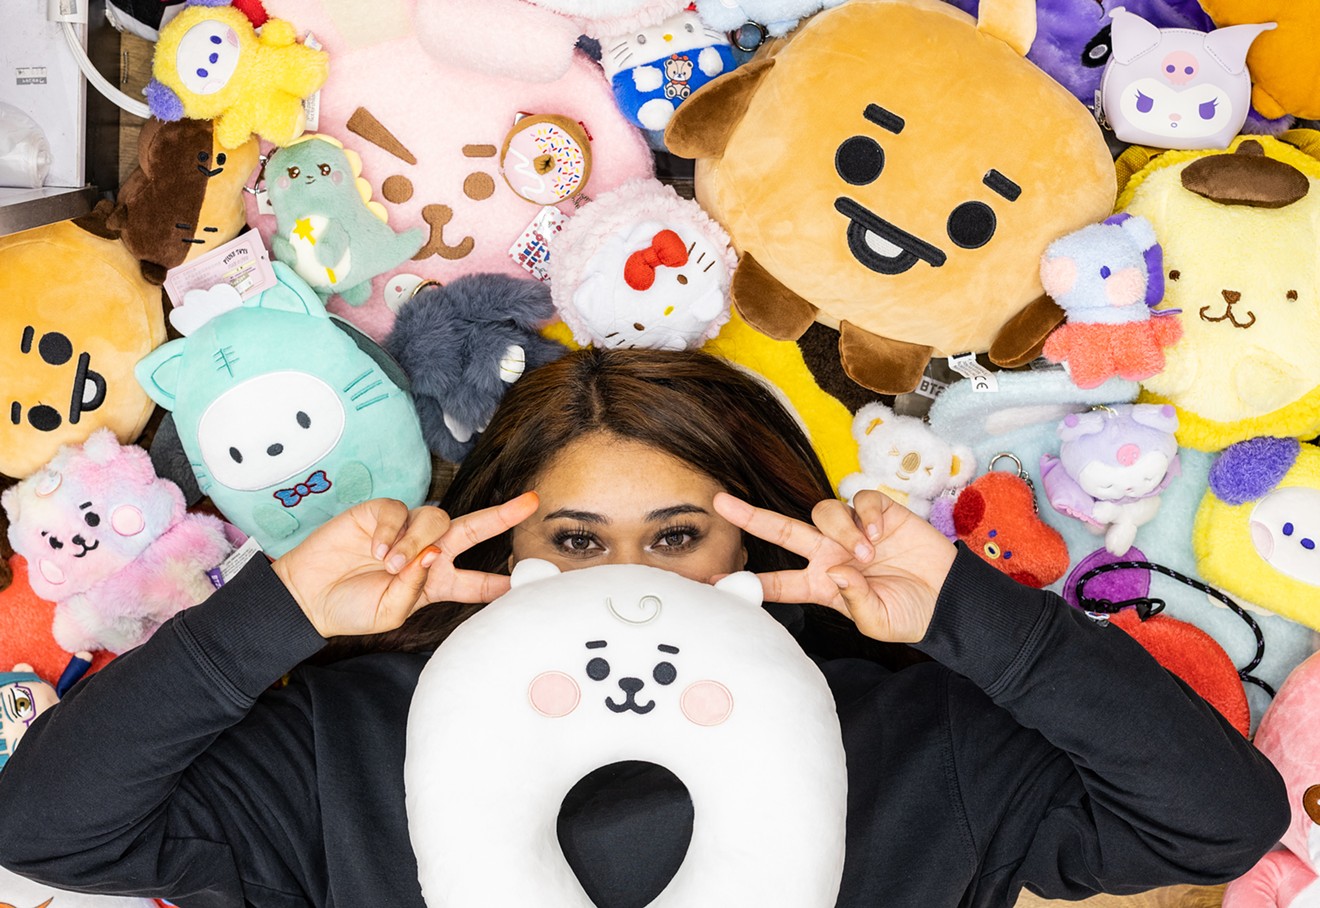 Pink Box Manager Rose Miller poses with plushy merchandise at the Korean novelty store.